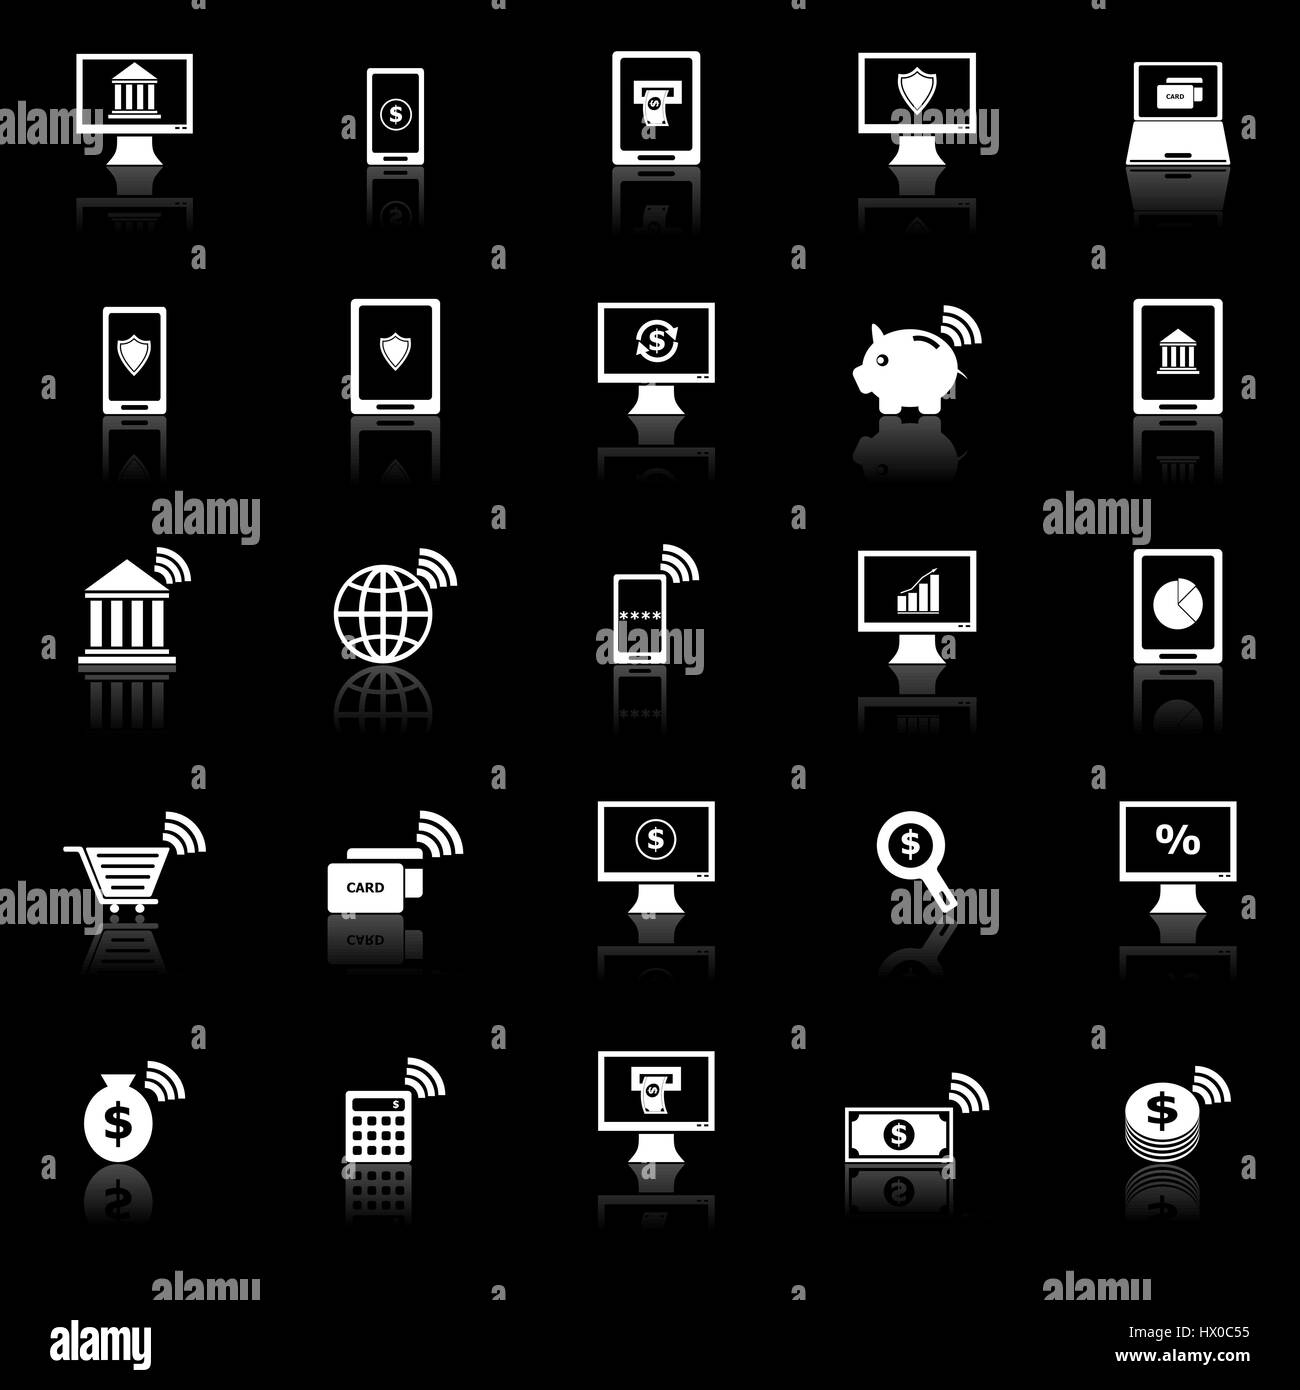 Online banking icons with reflect on black background, stock vector Stock Vector